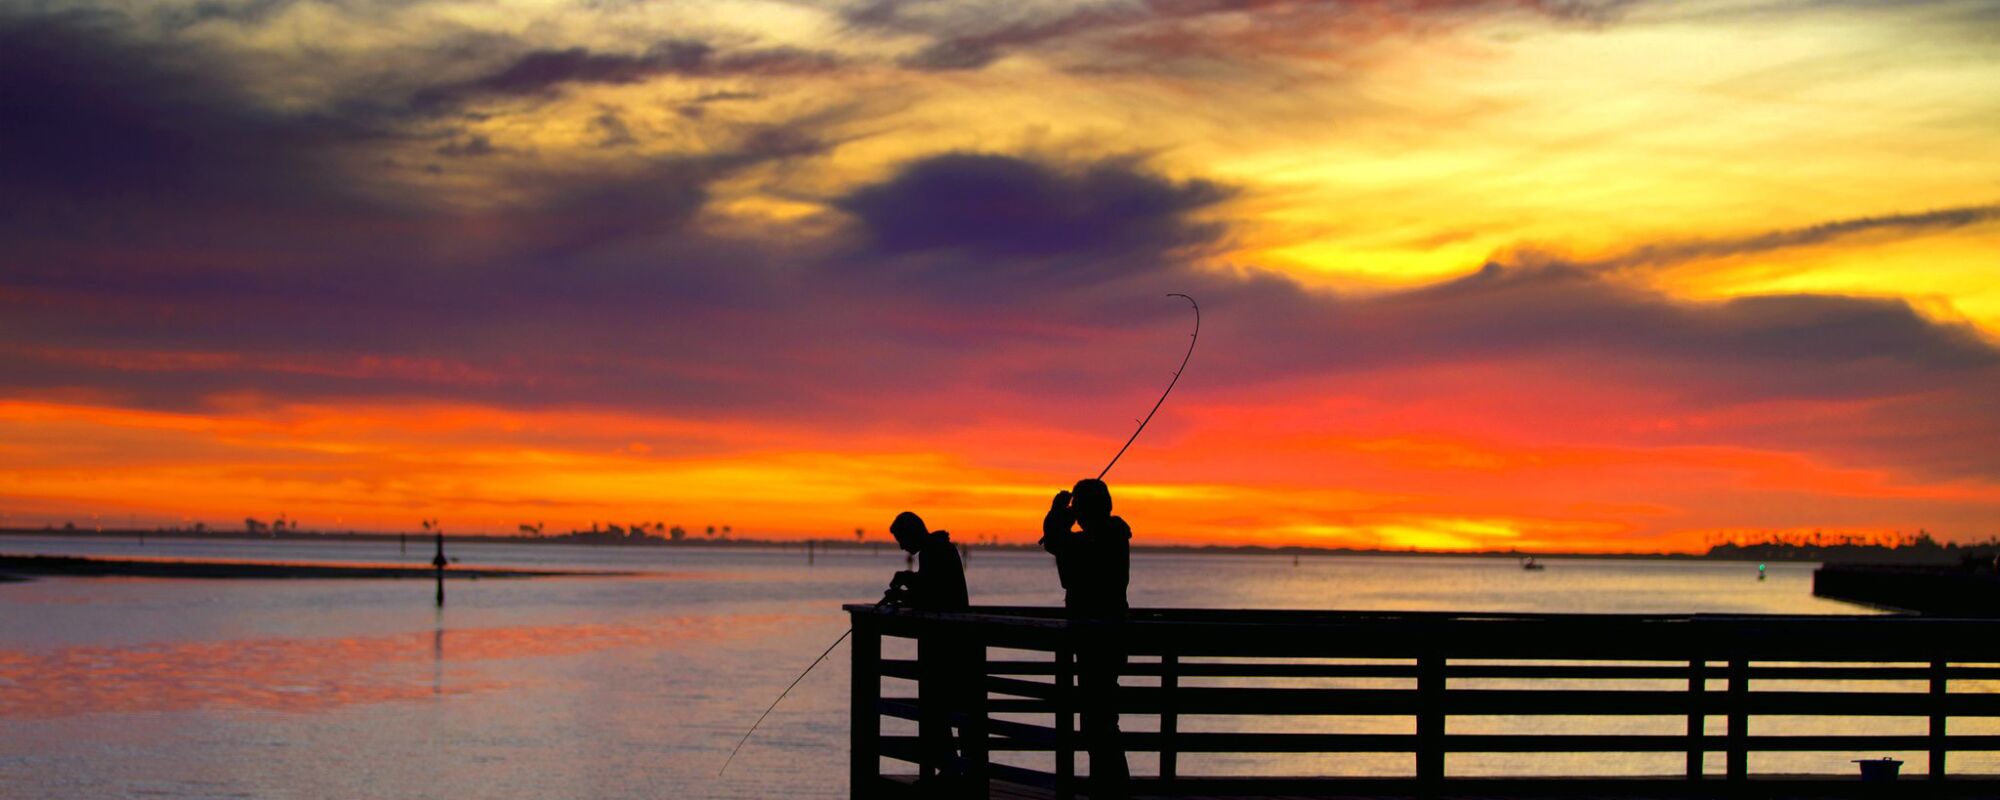 Pier fishermen take advantage of the recent beautiful weather in San Diego.